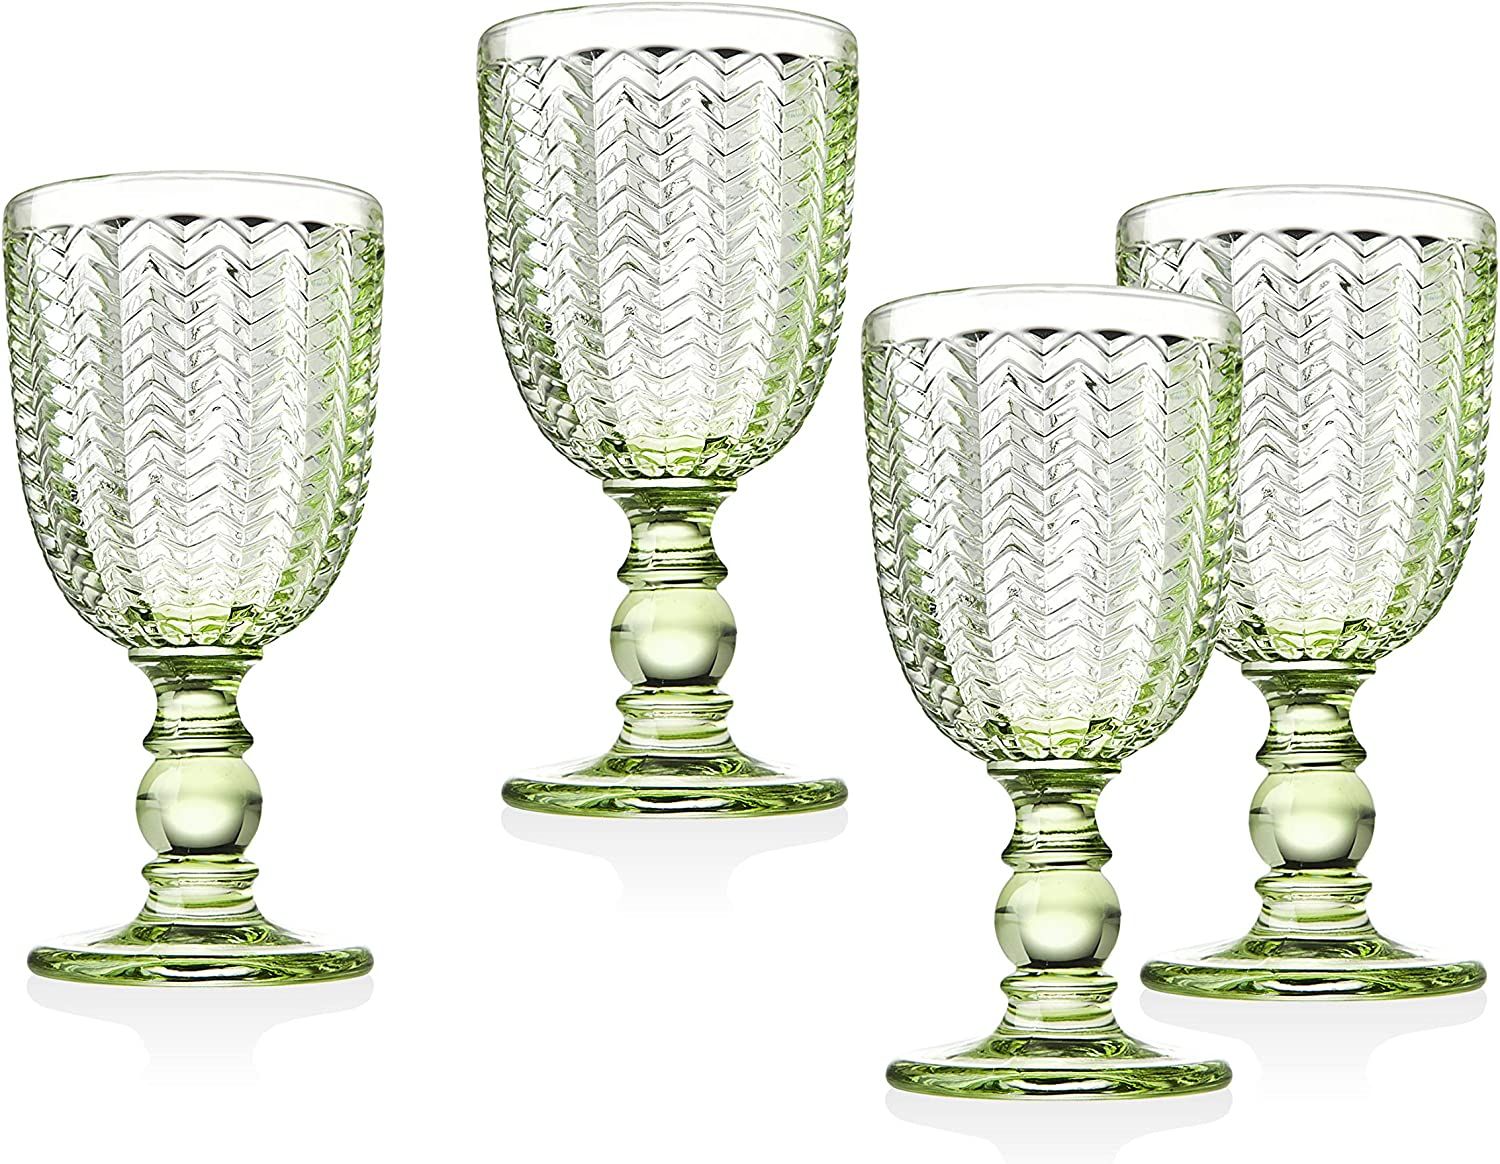 Twill Goblet Beverage Glass Cup by Godinger - Emerald Green - Set of 4 | Amazon (US)